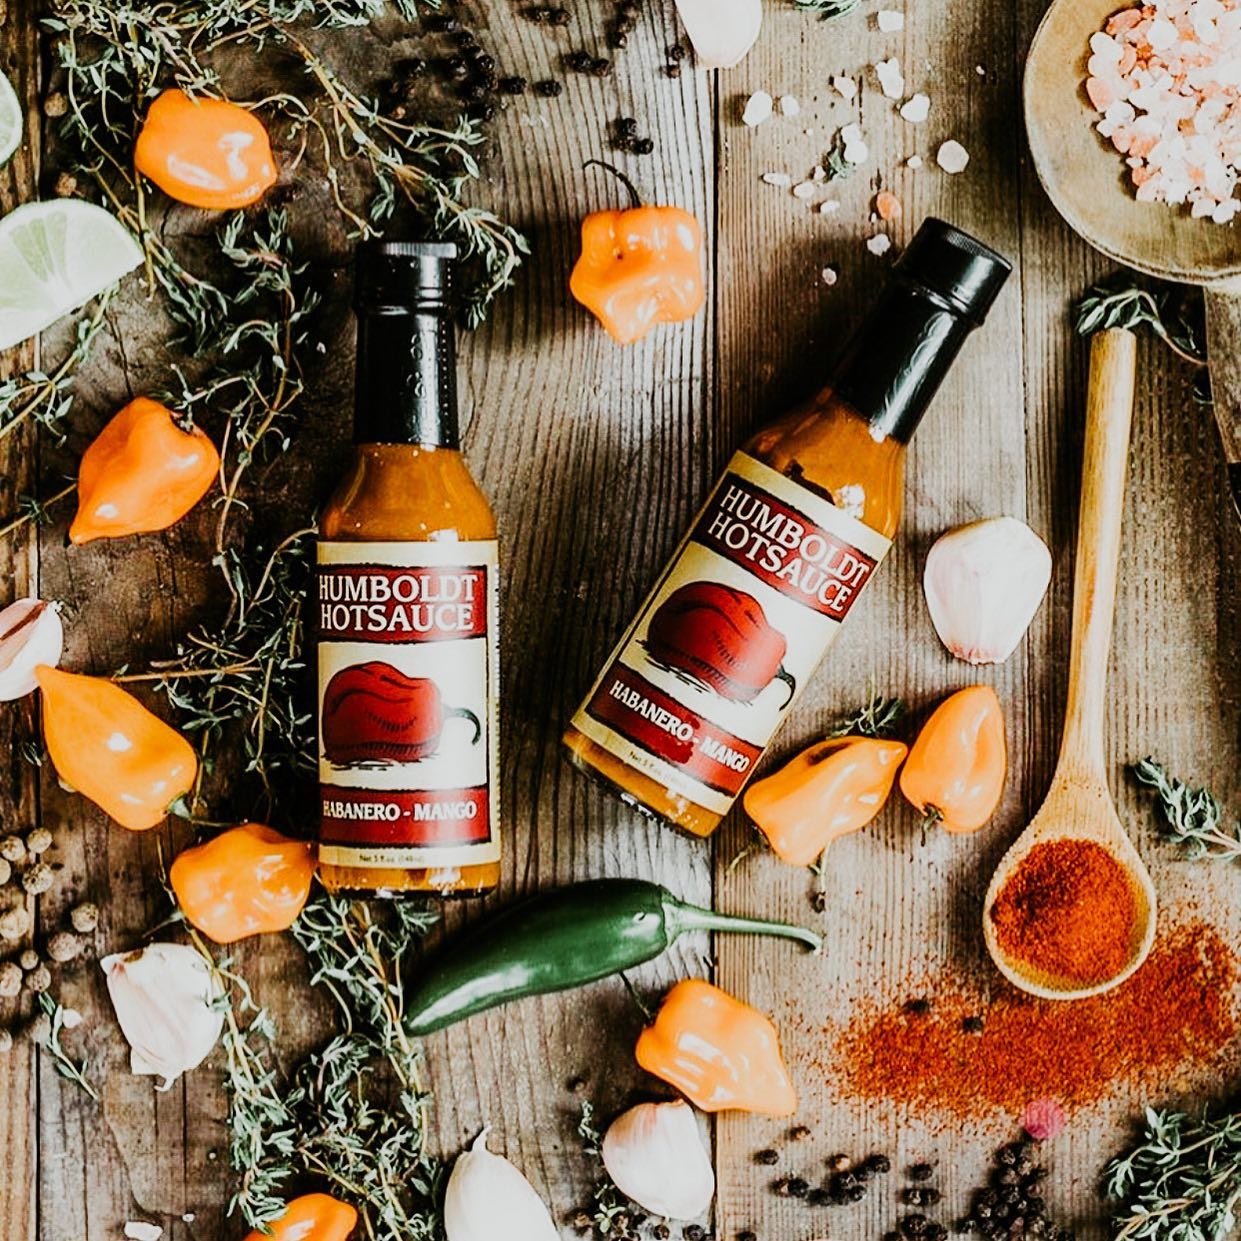 Locally Made Sauces